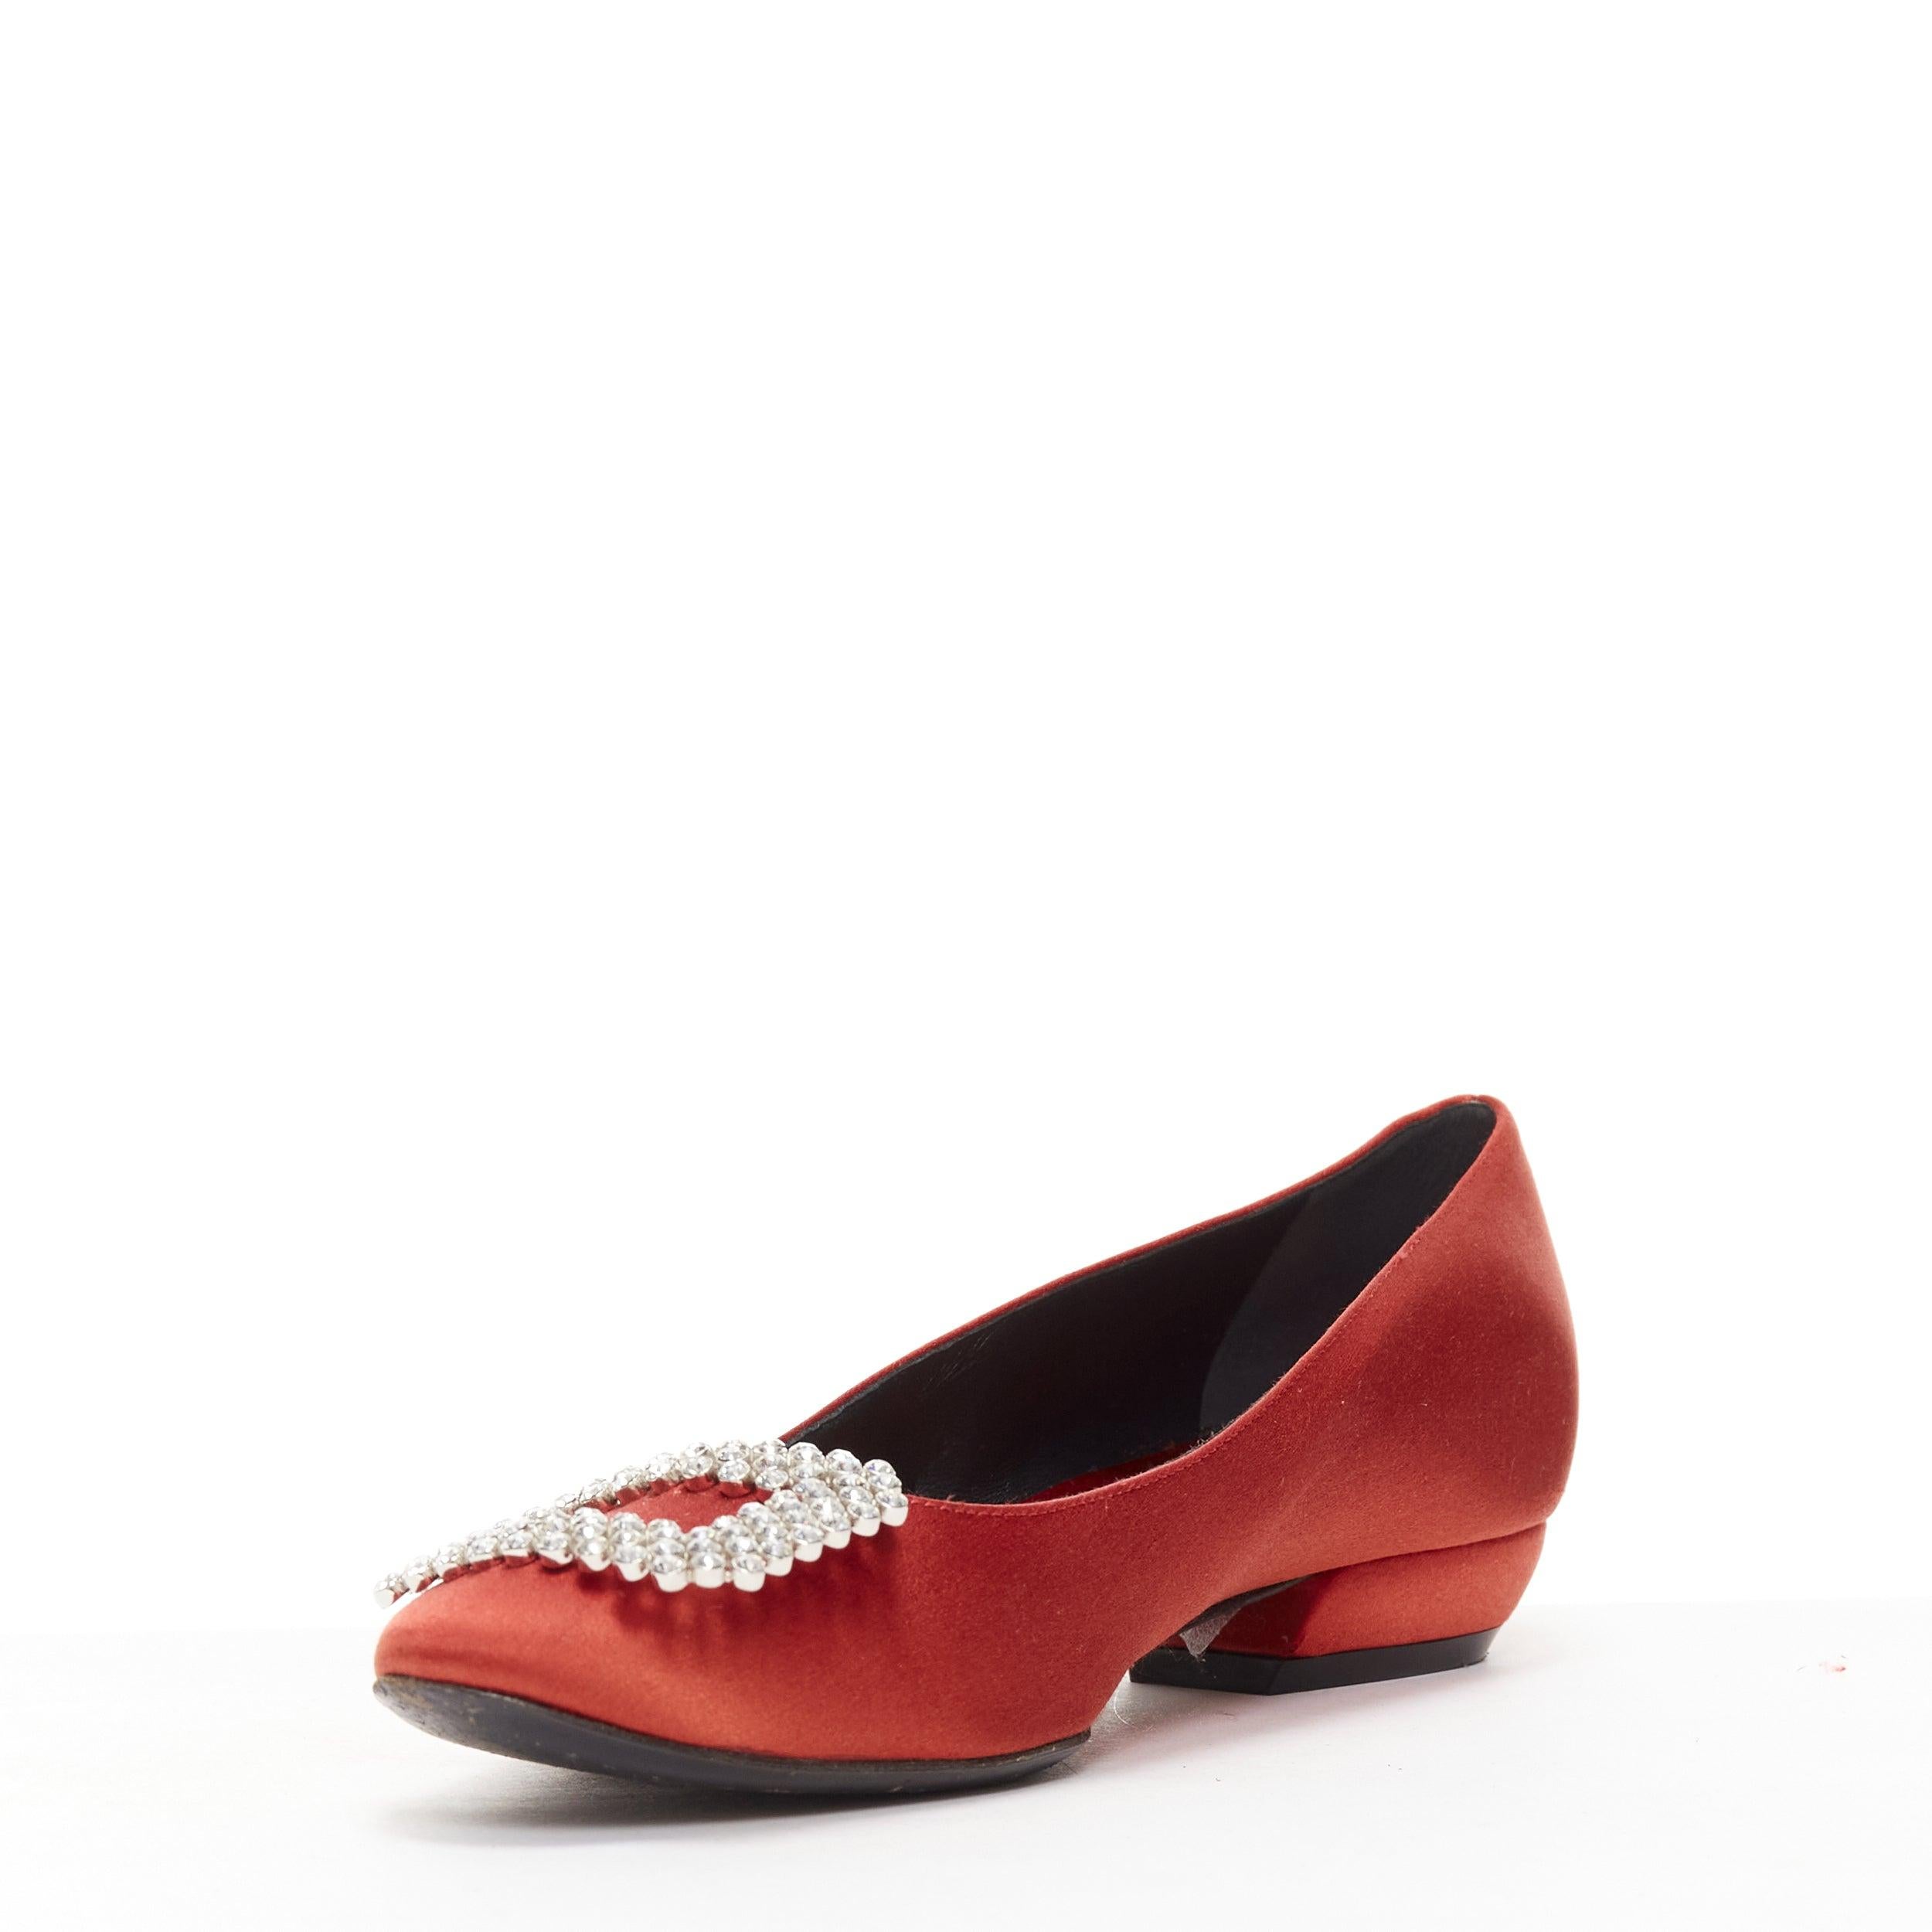 Women's ROGER VIVIER red satin silver strass crystal buckle classic dress flats EU36.5 For Sale